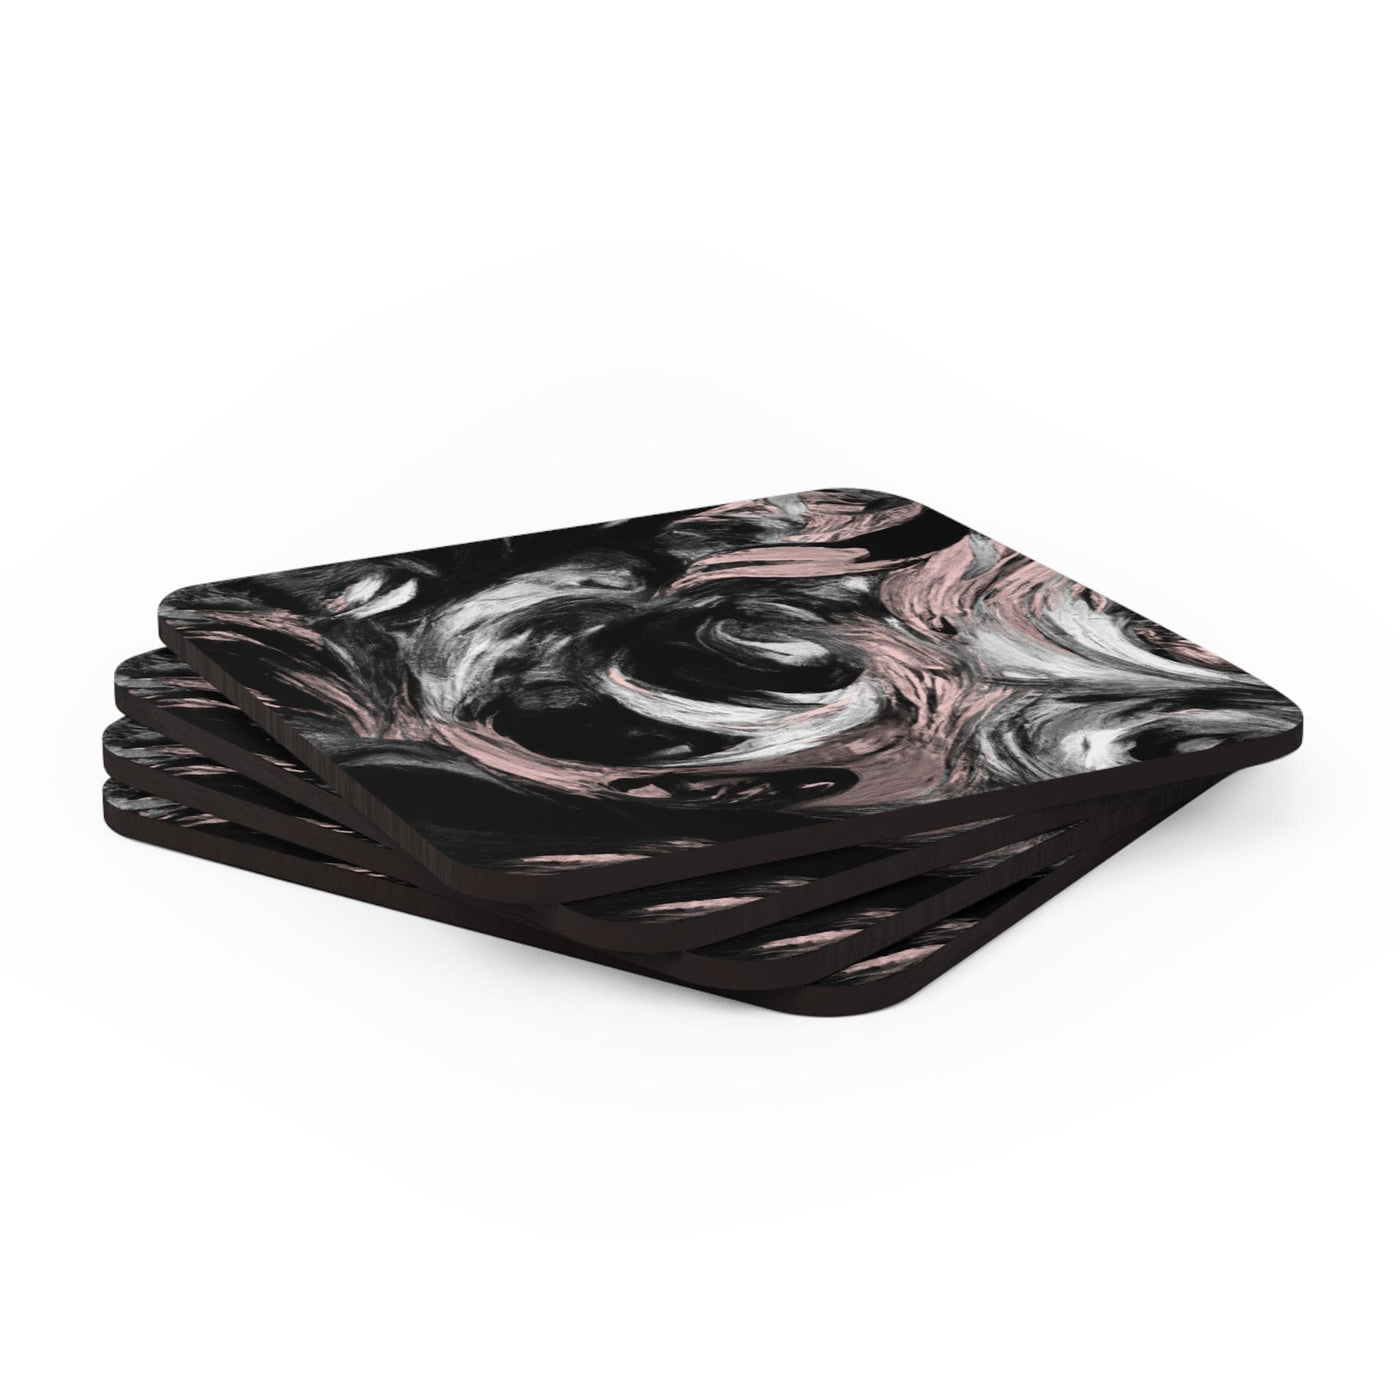 Coaster Set Of 4 For Drinks Black Pink White Abstract Pattern - Decorative